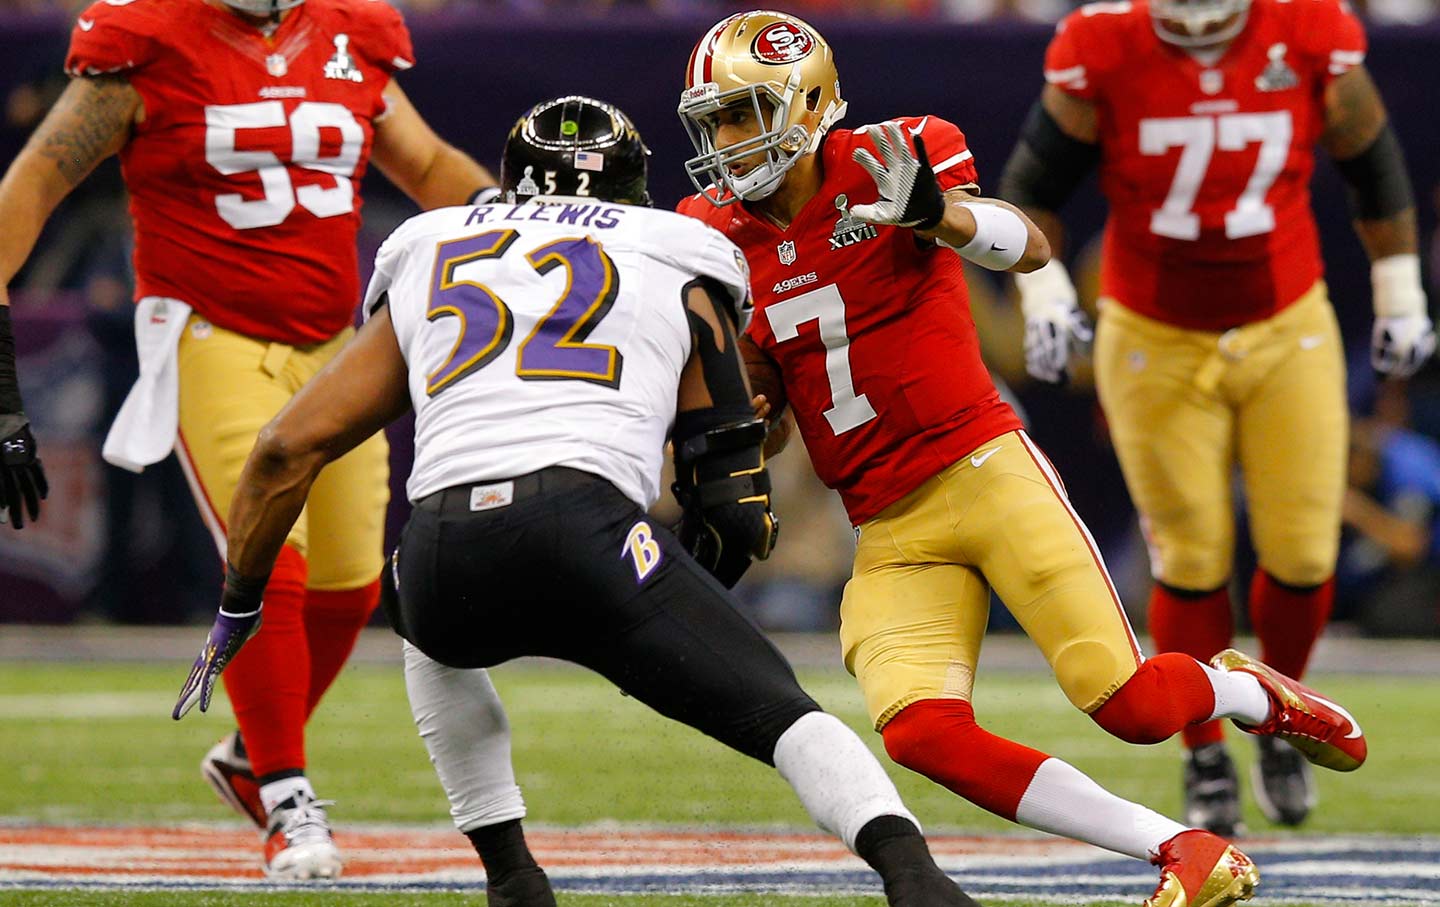 Ray Lewis (52) chases San Francisco 49ers quarterback Colin Kaepernick (7) during the NFL Super Bowl XLVII game on February 3, 2013.